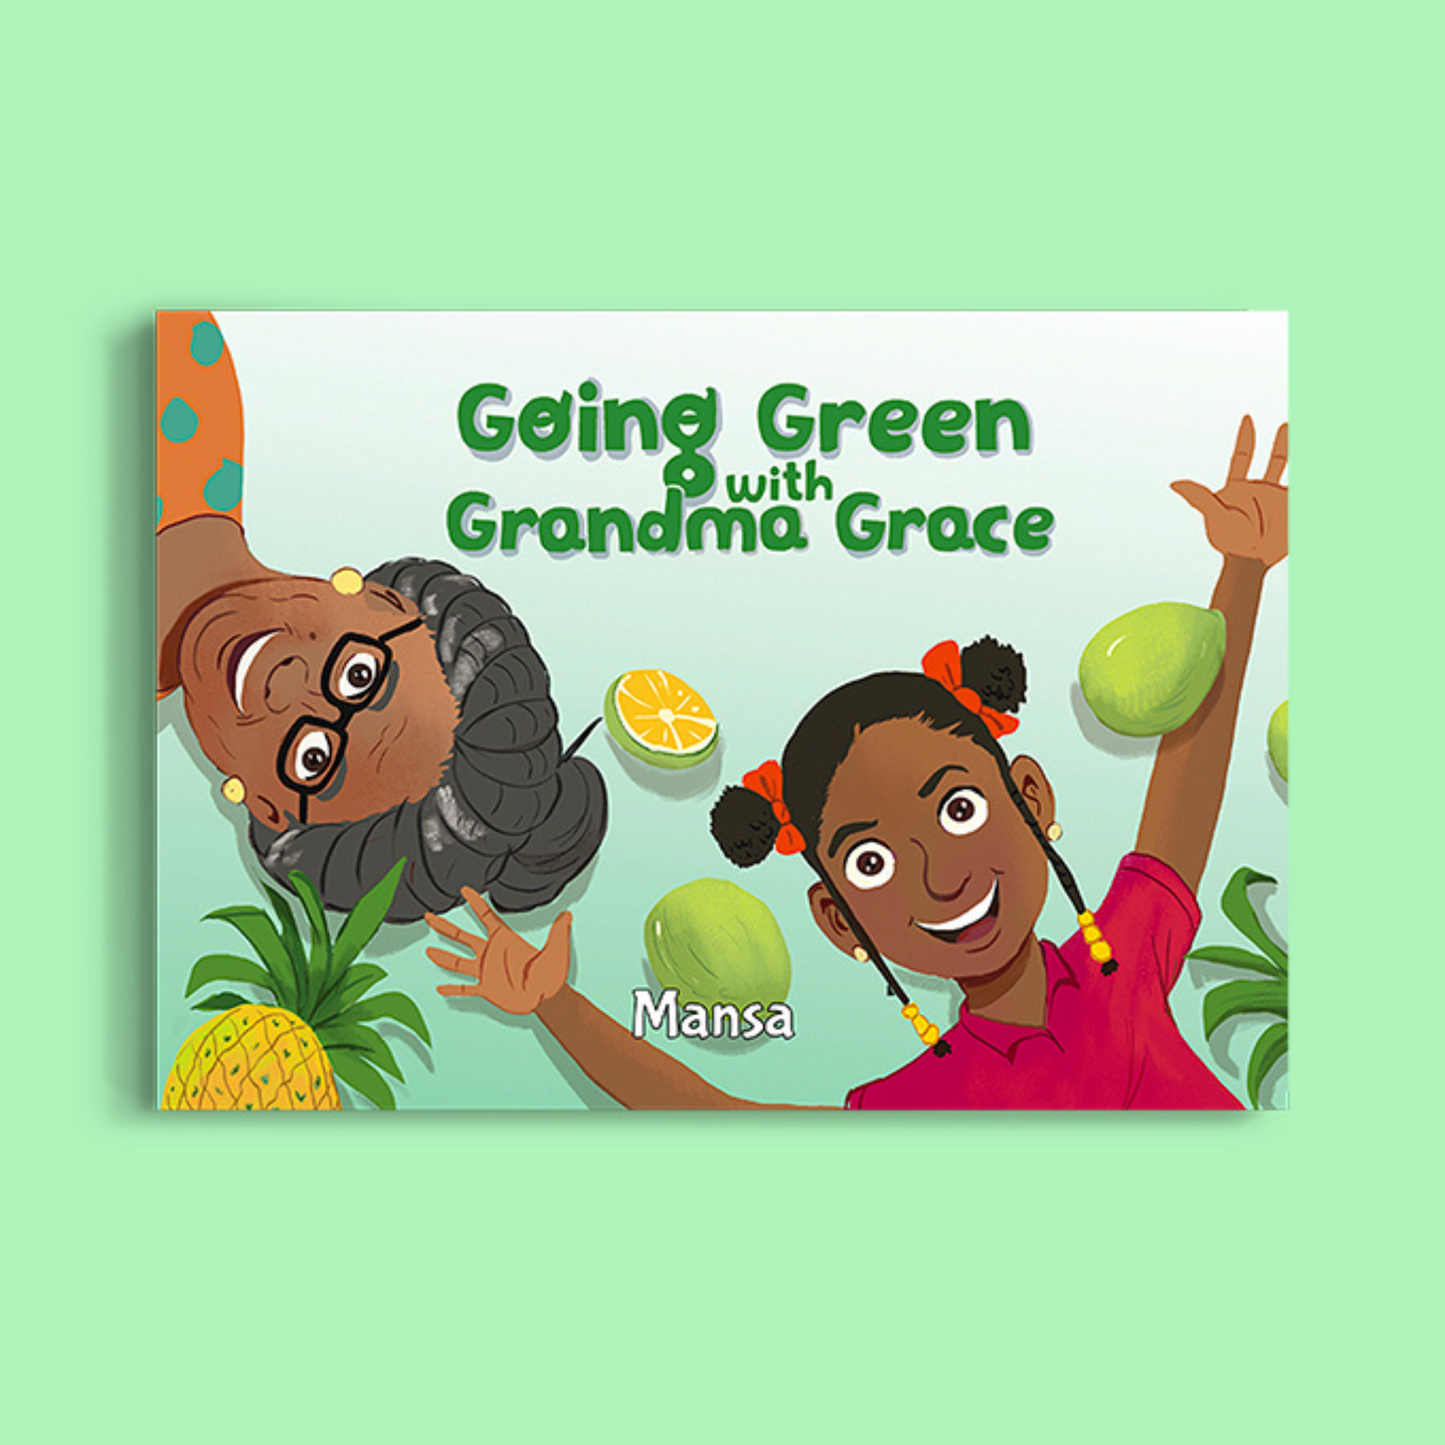 Going Green with Grandma Grace